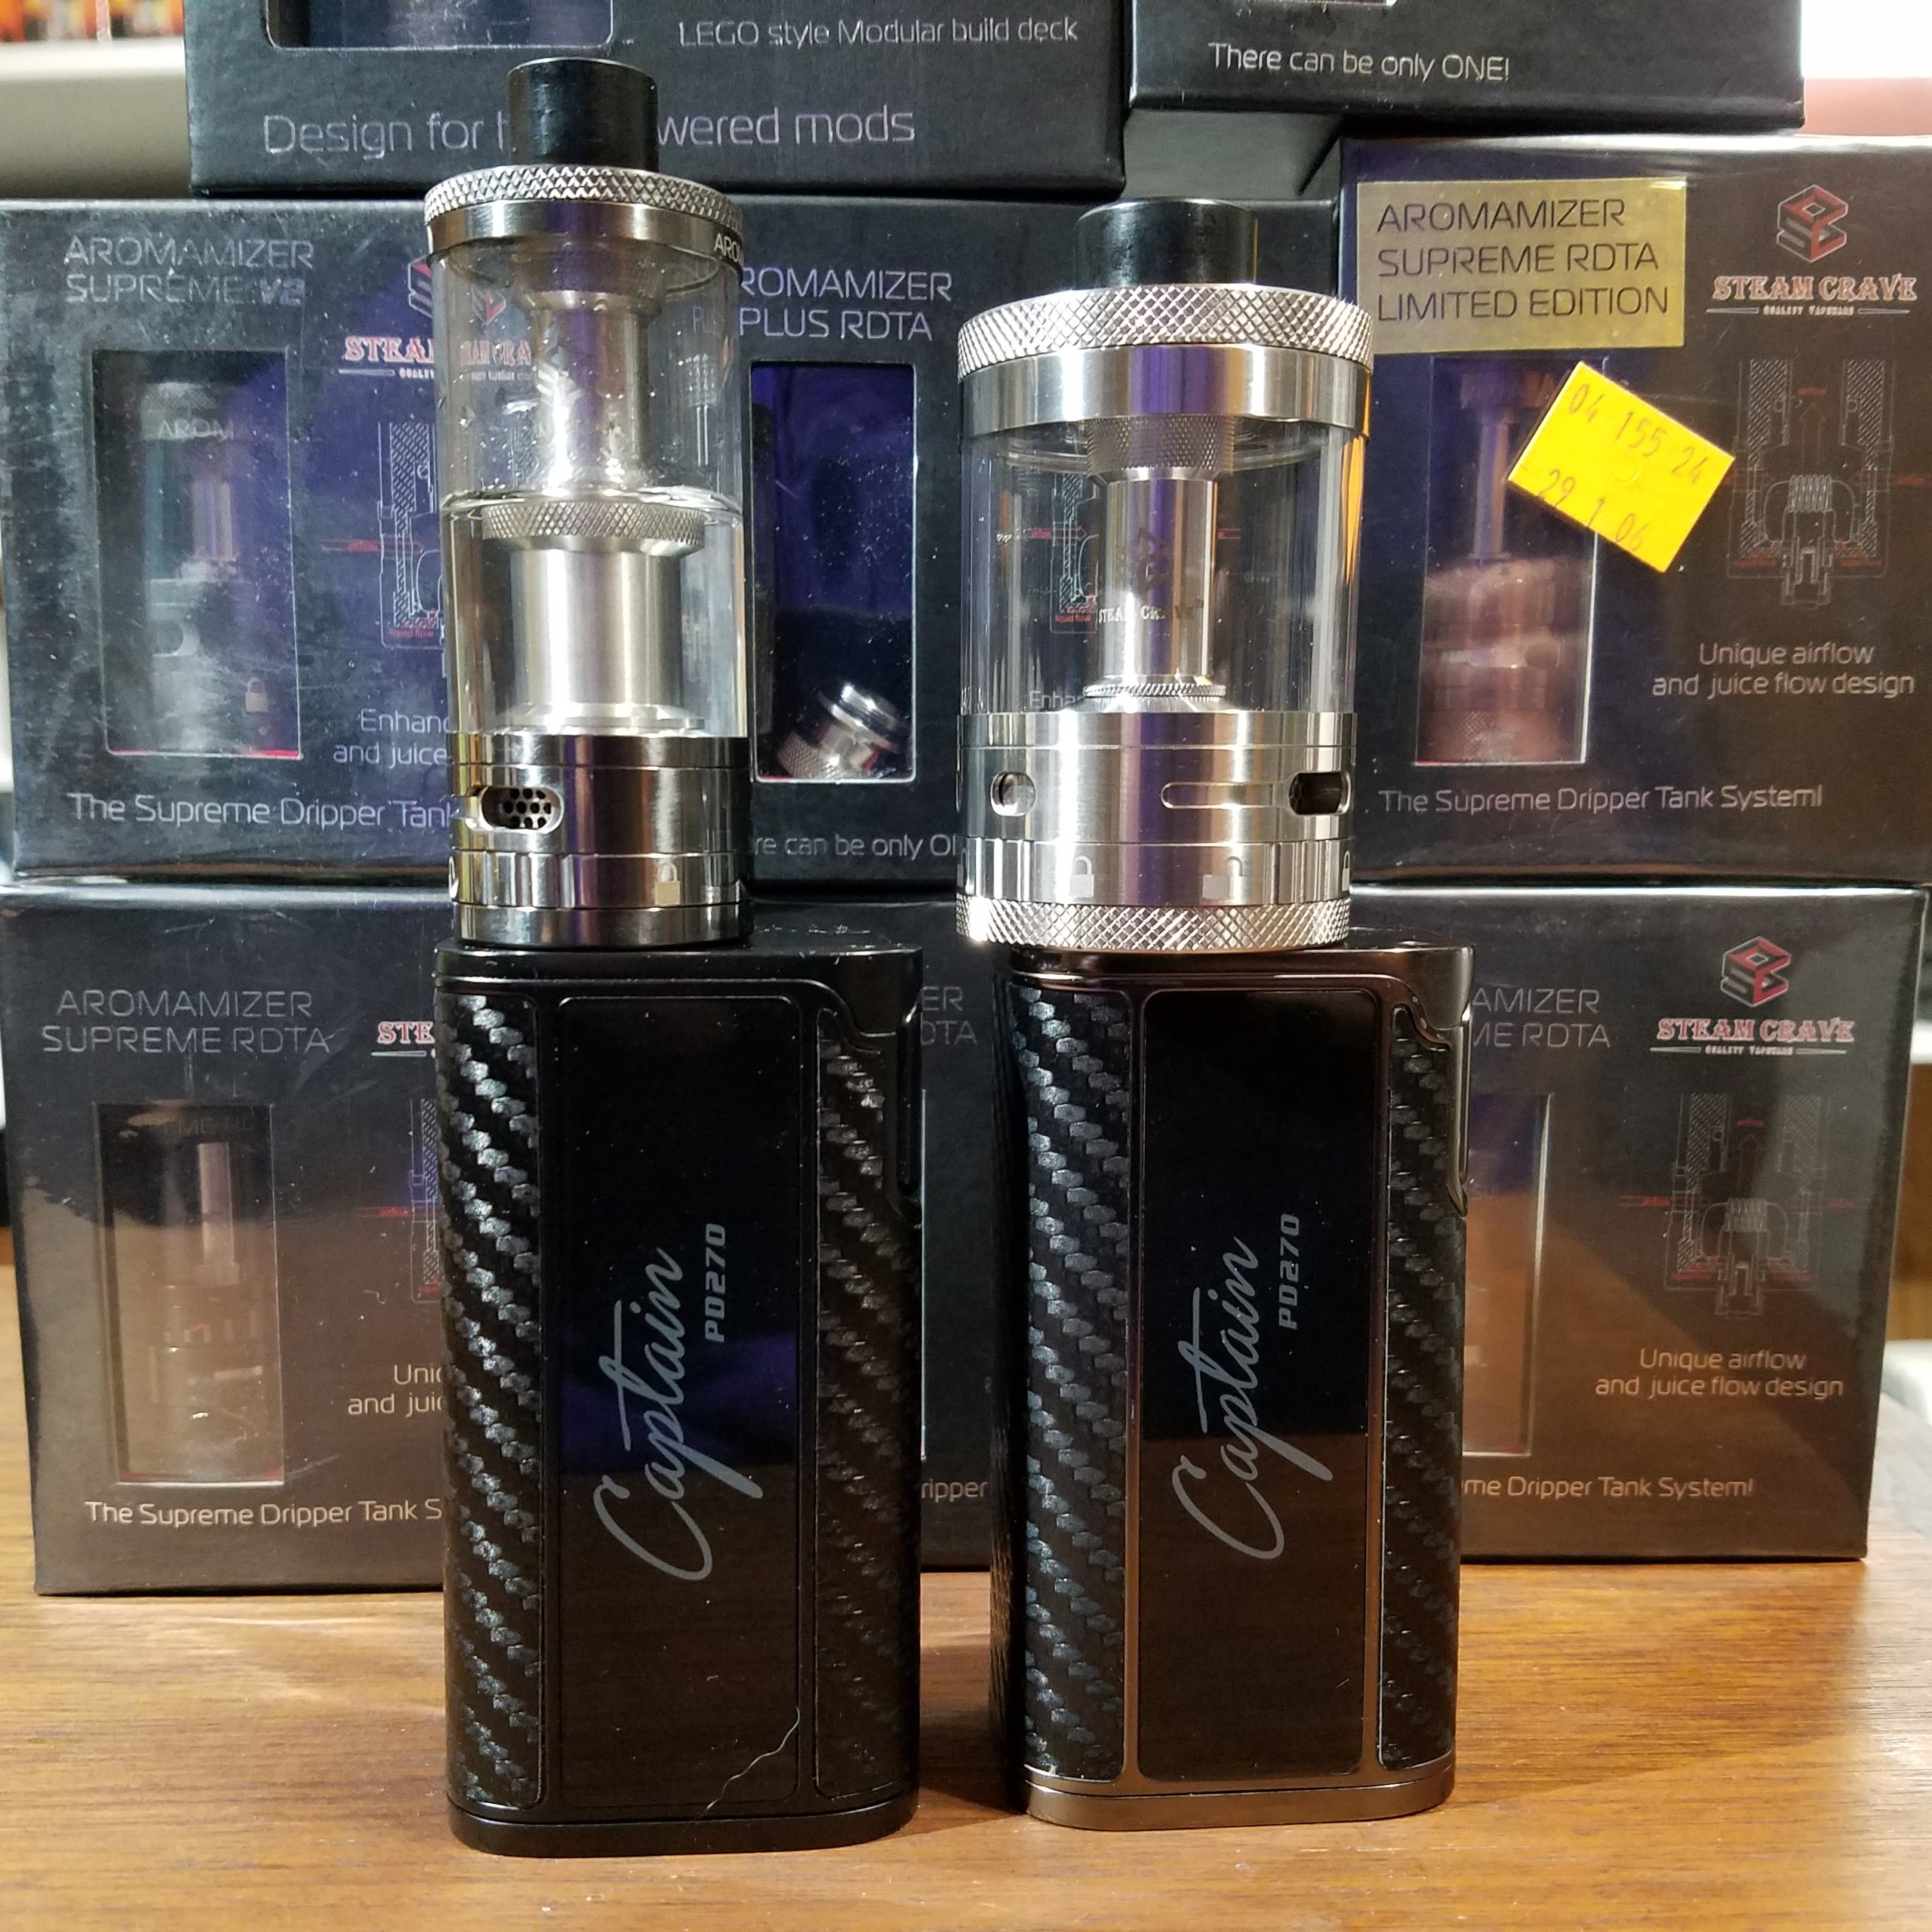 Aromamizer plus rdta by steam crave фото 107